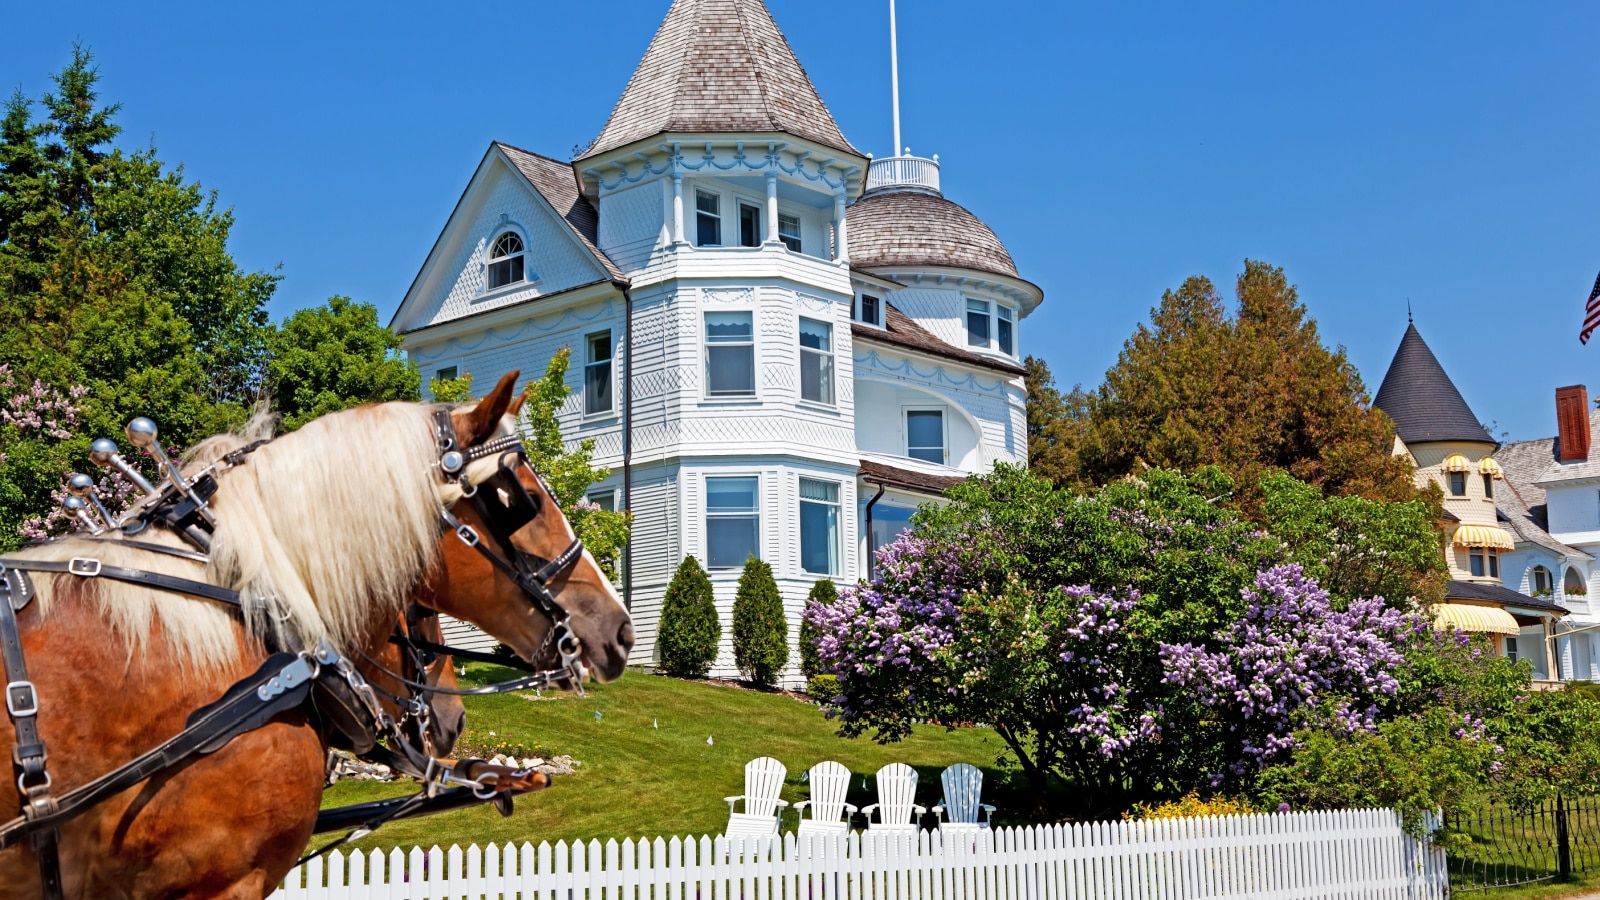 <p>Located on Lake Huron, Mackinac Island is a must-visit for its car-free environment, Victorian charm, and stunning vistas. It offers a step back in time.</p>